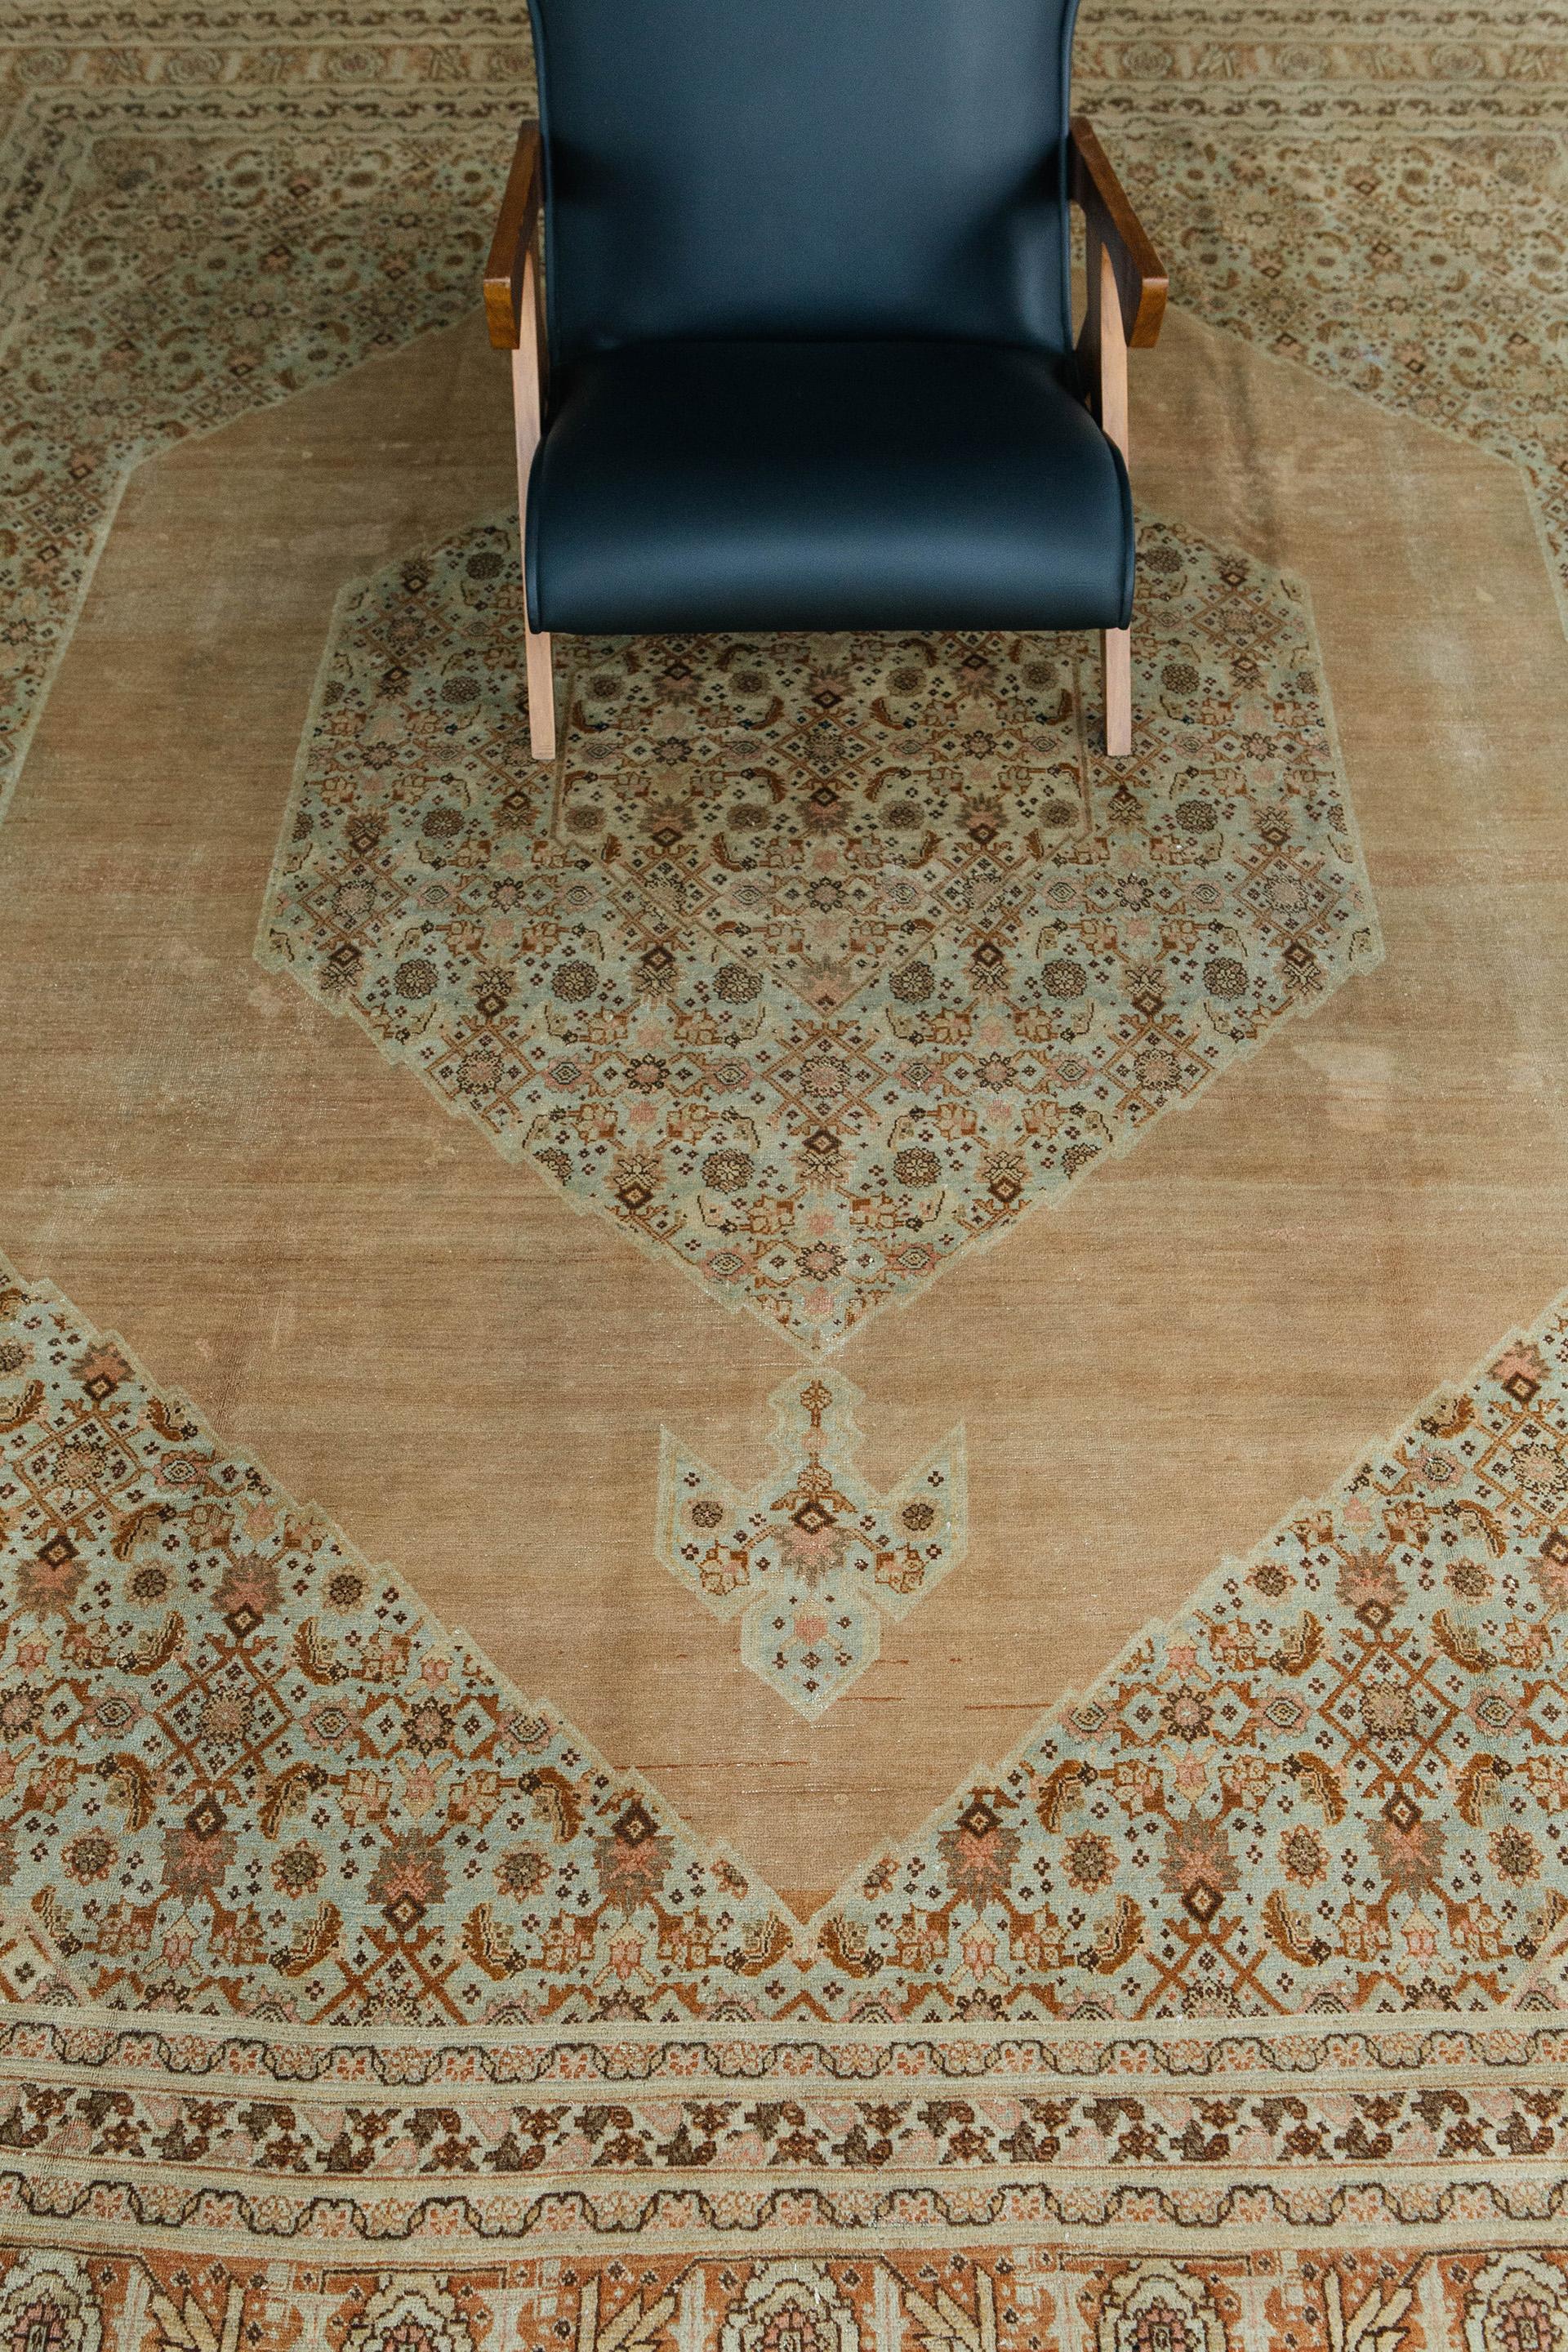 Antique Tabriz in soft camel with ivory, tan and celadon, and accents of browns, rose and umber tones. The composition features a large hexagonal medallion with geometric pendants and corner-pieces. These areas have a small-scale herati pattern with